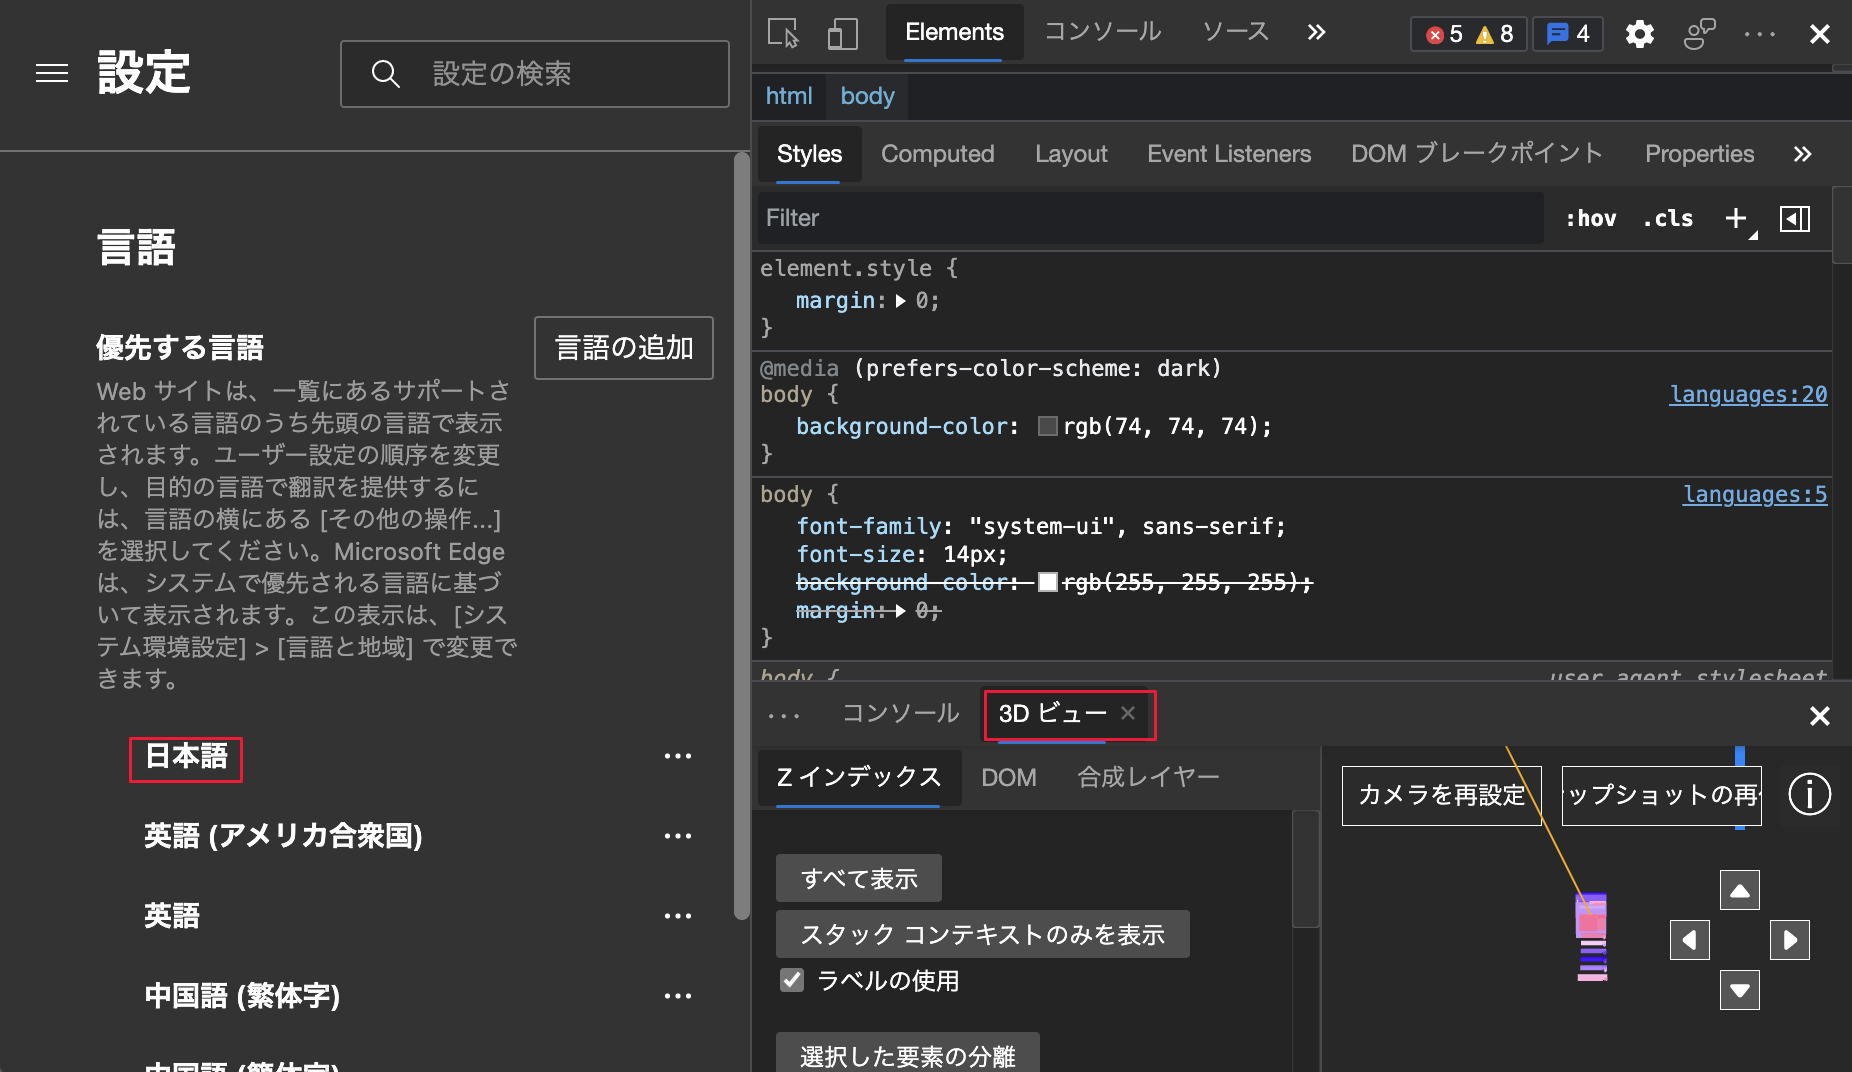 Microsoft Edge browser and DevTools set to Japanese